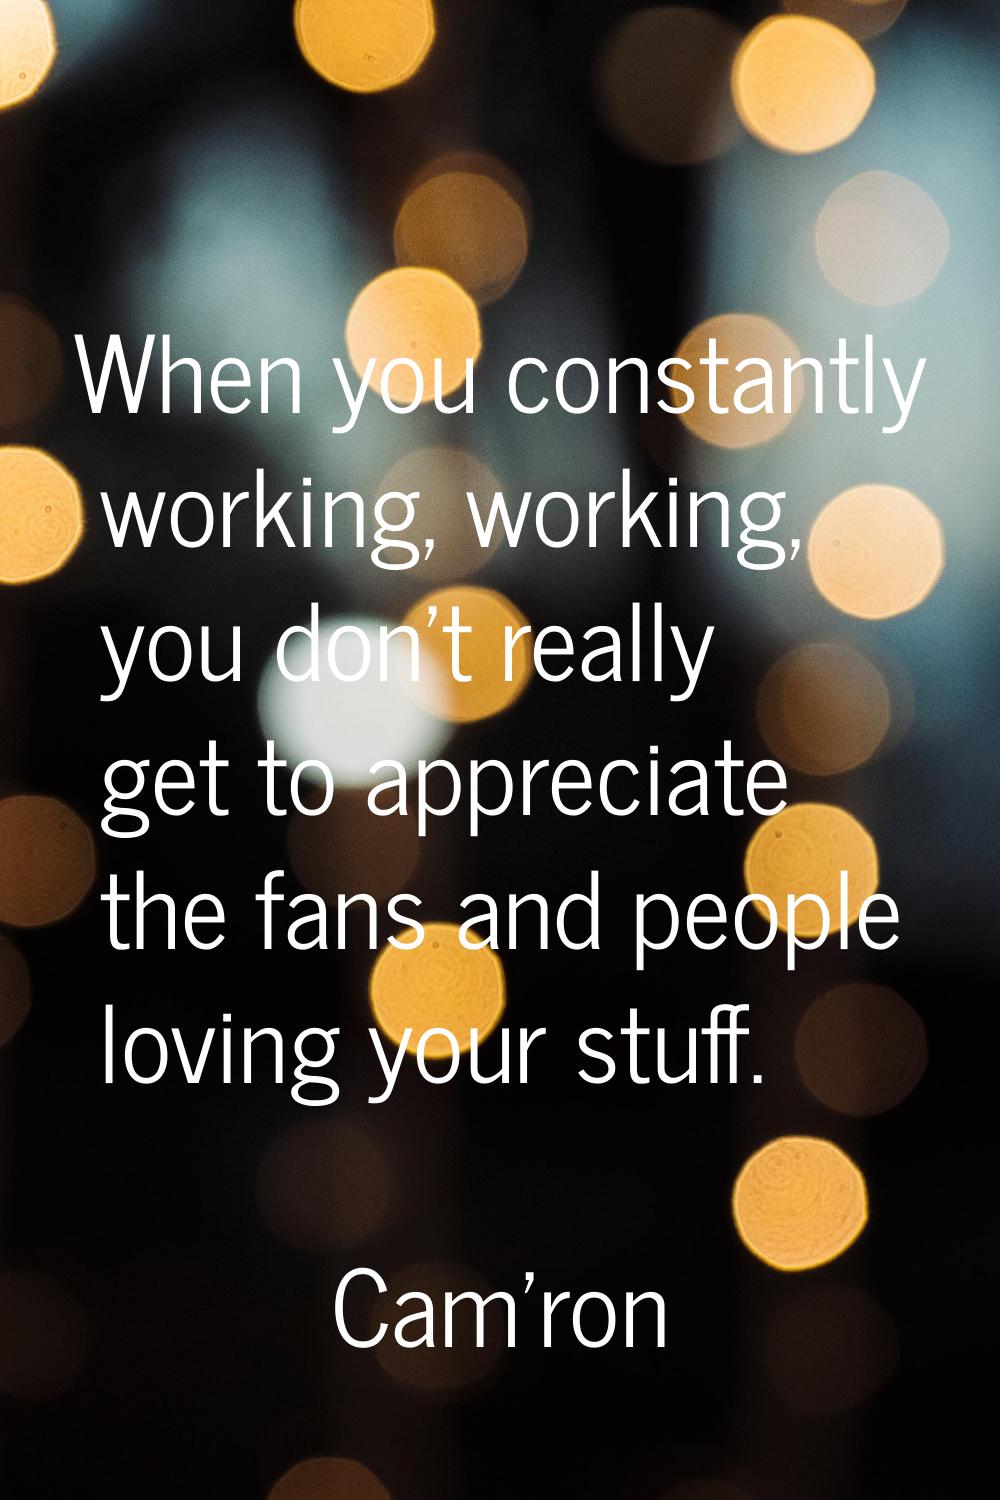 When you constantly working, working, you don't really get to appreciate the fans and people loving